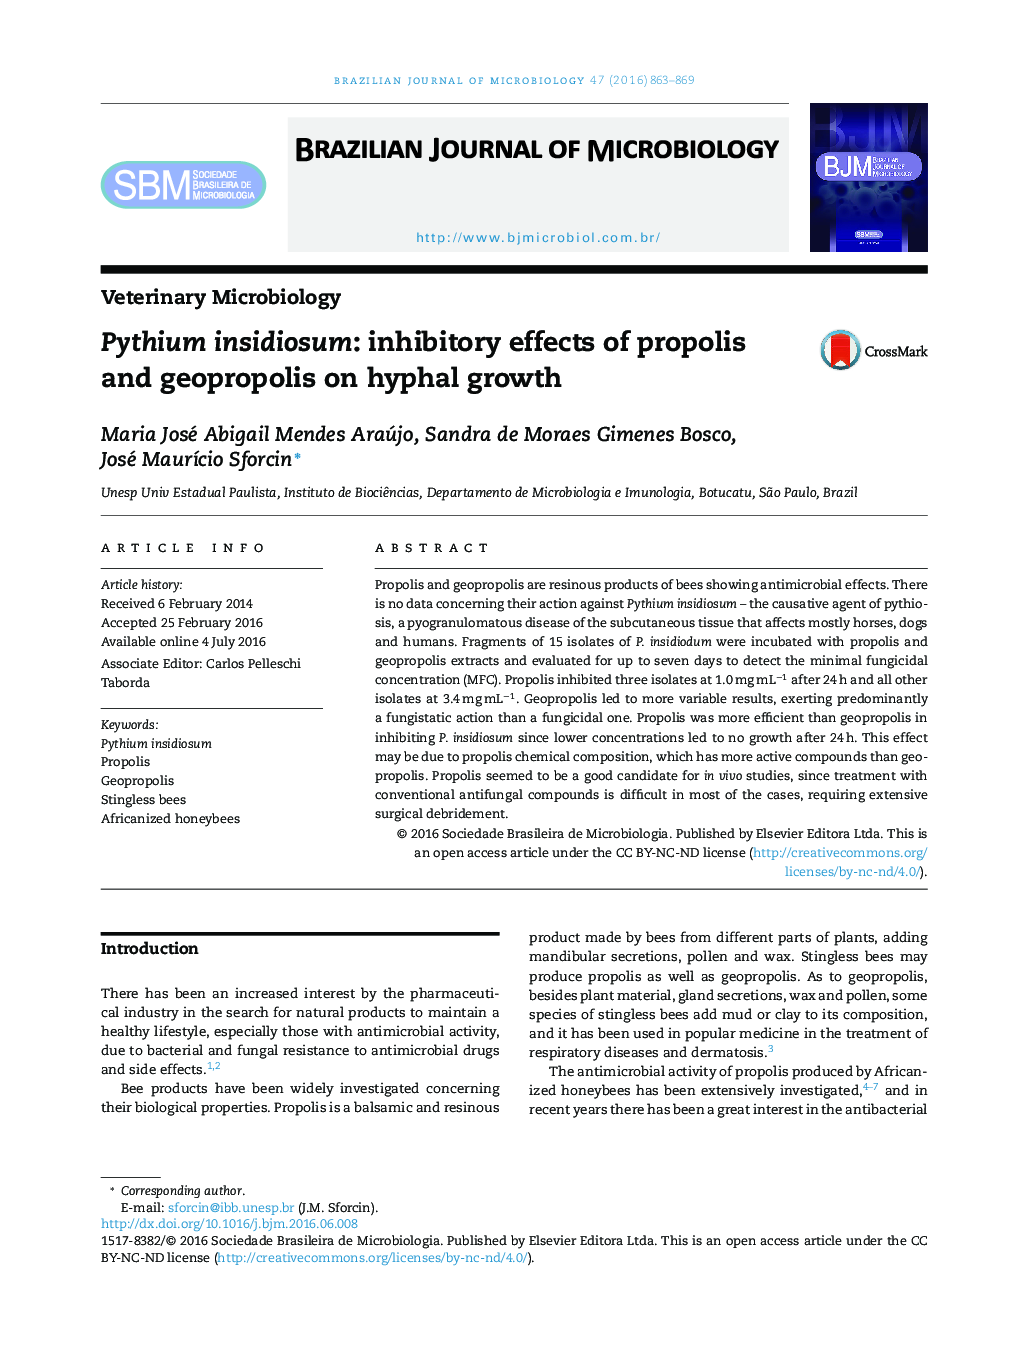 Pythium insidiosum: inhibitory effects of propolis and geopropolis on hyphal growth